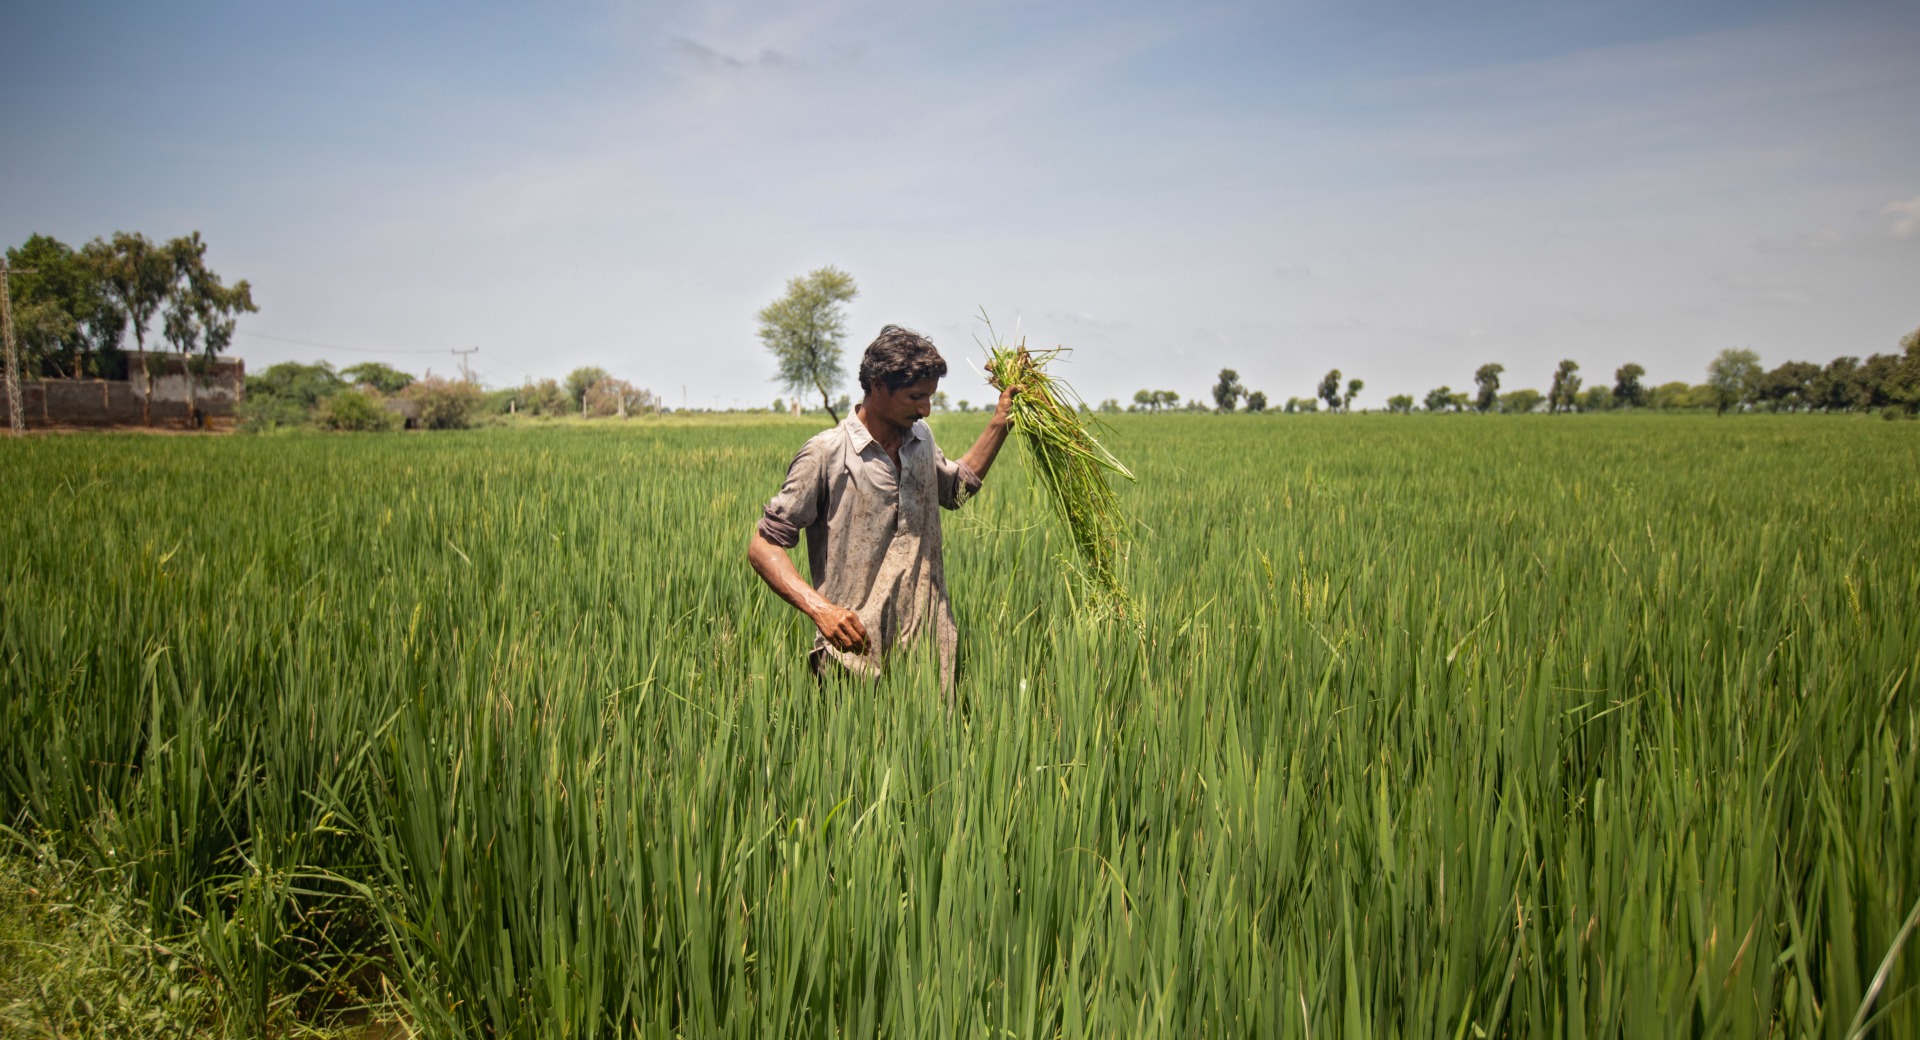 In Pakistan's Sindh province, Action Against Hunger is helping farmers grow Zinc-enriched wheat for improved nutrition. Abdul Razzak, 30, received training in Crop Cultivation which has helped him increase his yearly yield.